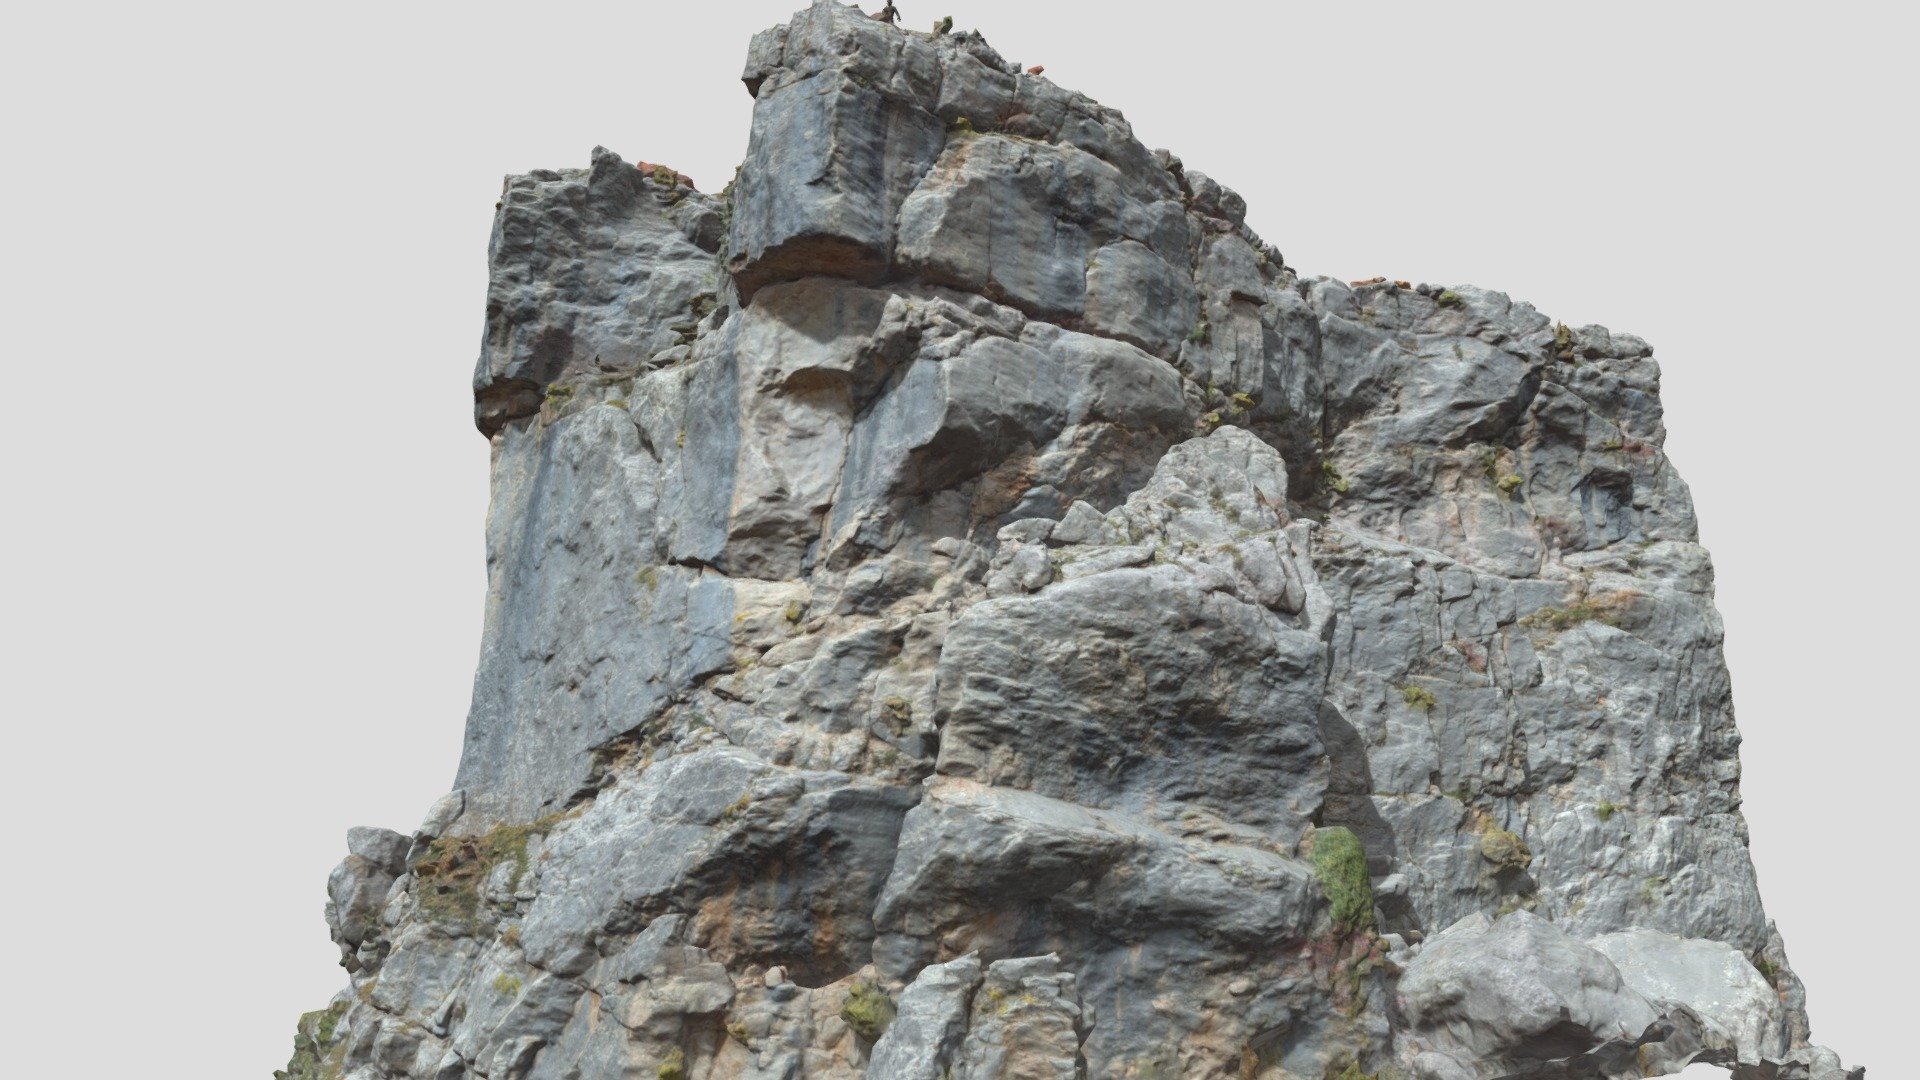 Fully processed 3D scans: no light information, color-matched, etc. 

Ready to use for all kind of CGI

Source Contains:





.blend




.obj




.fbx



8K Textures for each model:





normal




albedo




roughness



Please let me know if something isn’t working as it should.

Huge Boulder Cliff Rock Drone Scan - Huge Boulder Cliff Rock Drone Scan - Buy Royalty Free 3D model by Per's Scan Collection (@perz_scans) 3d model